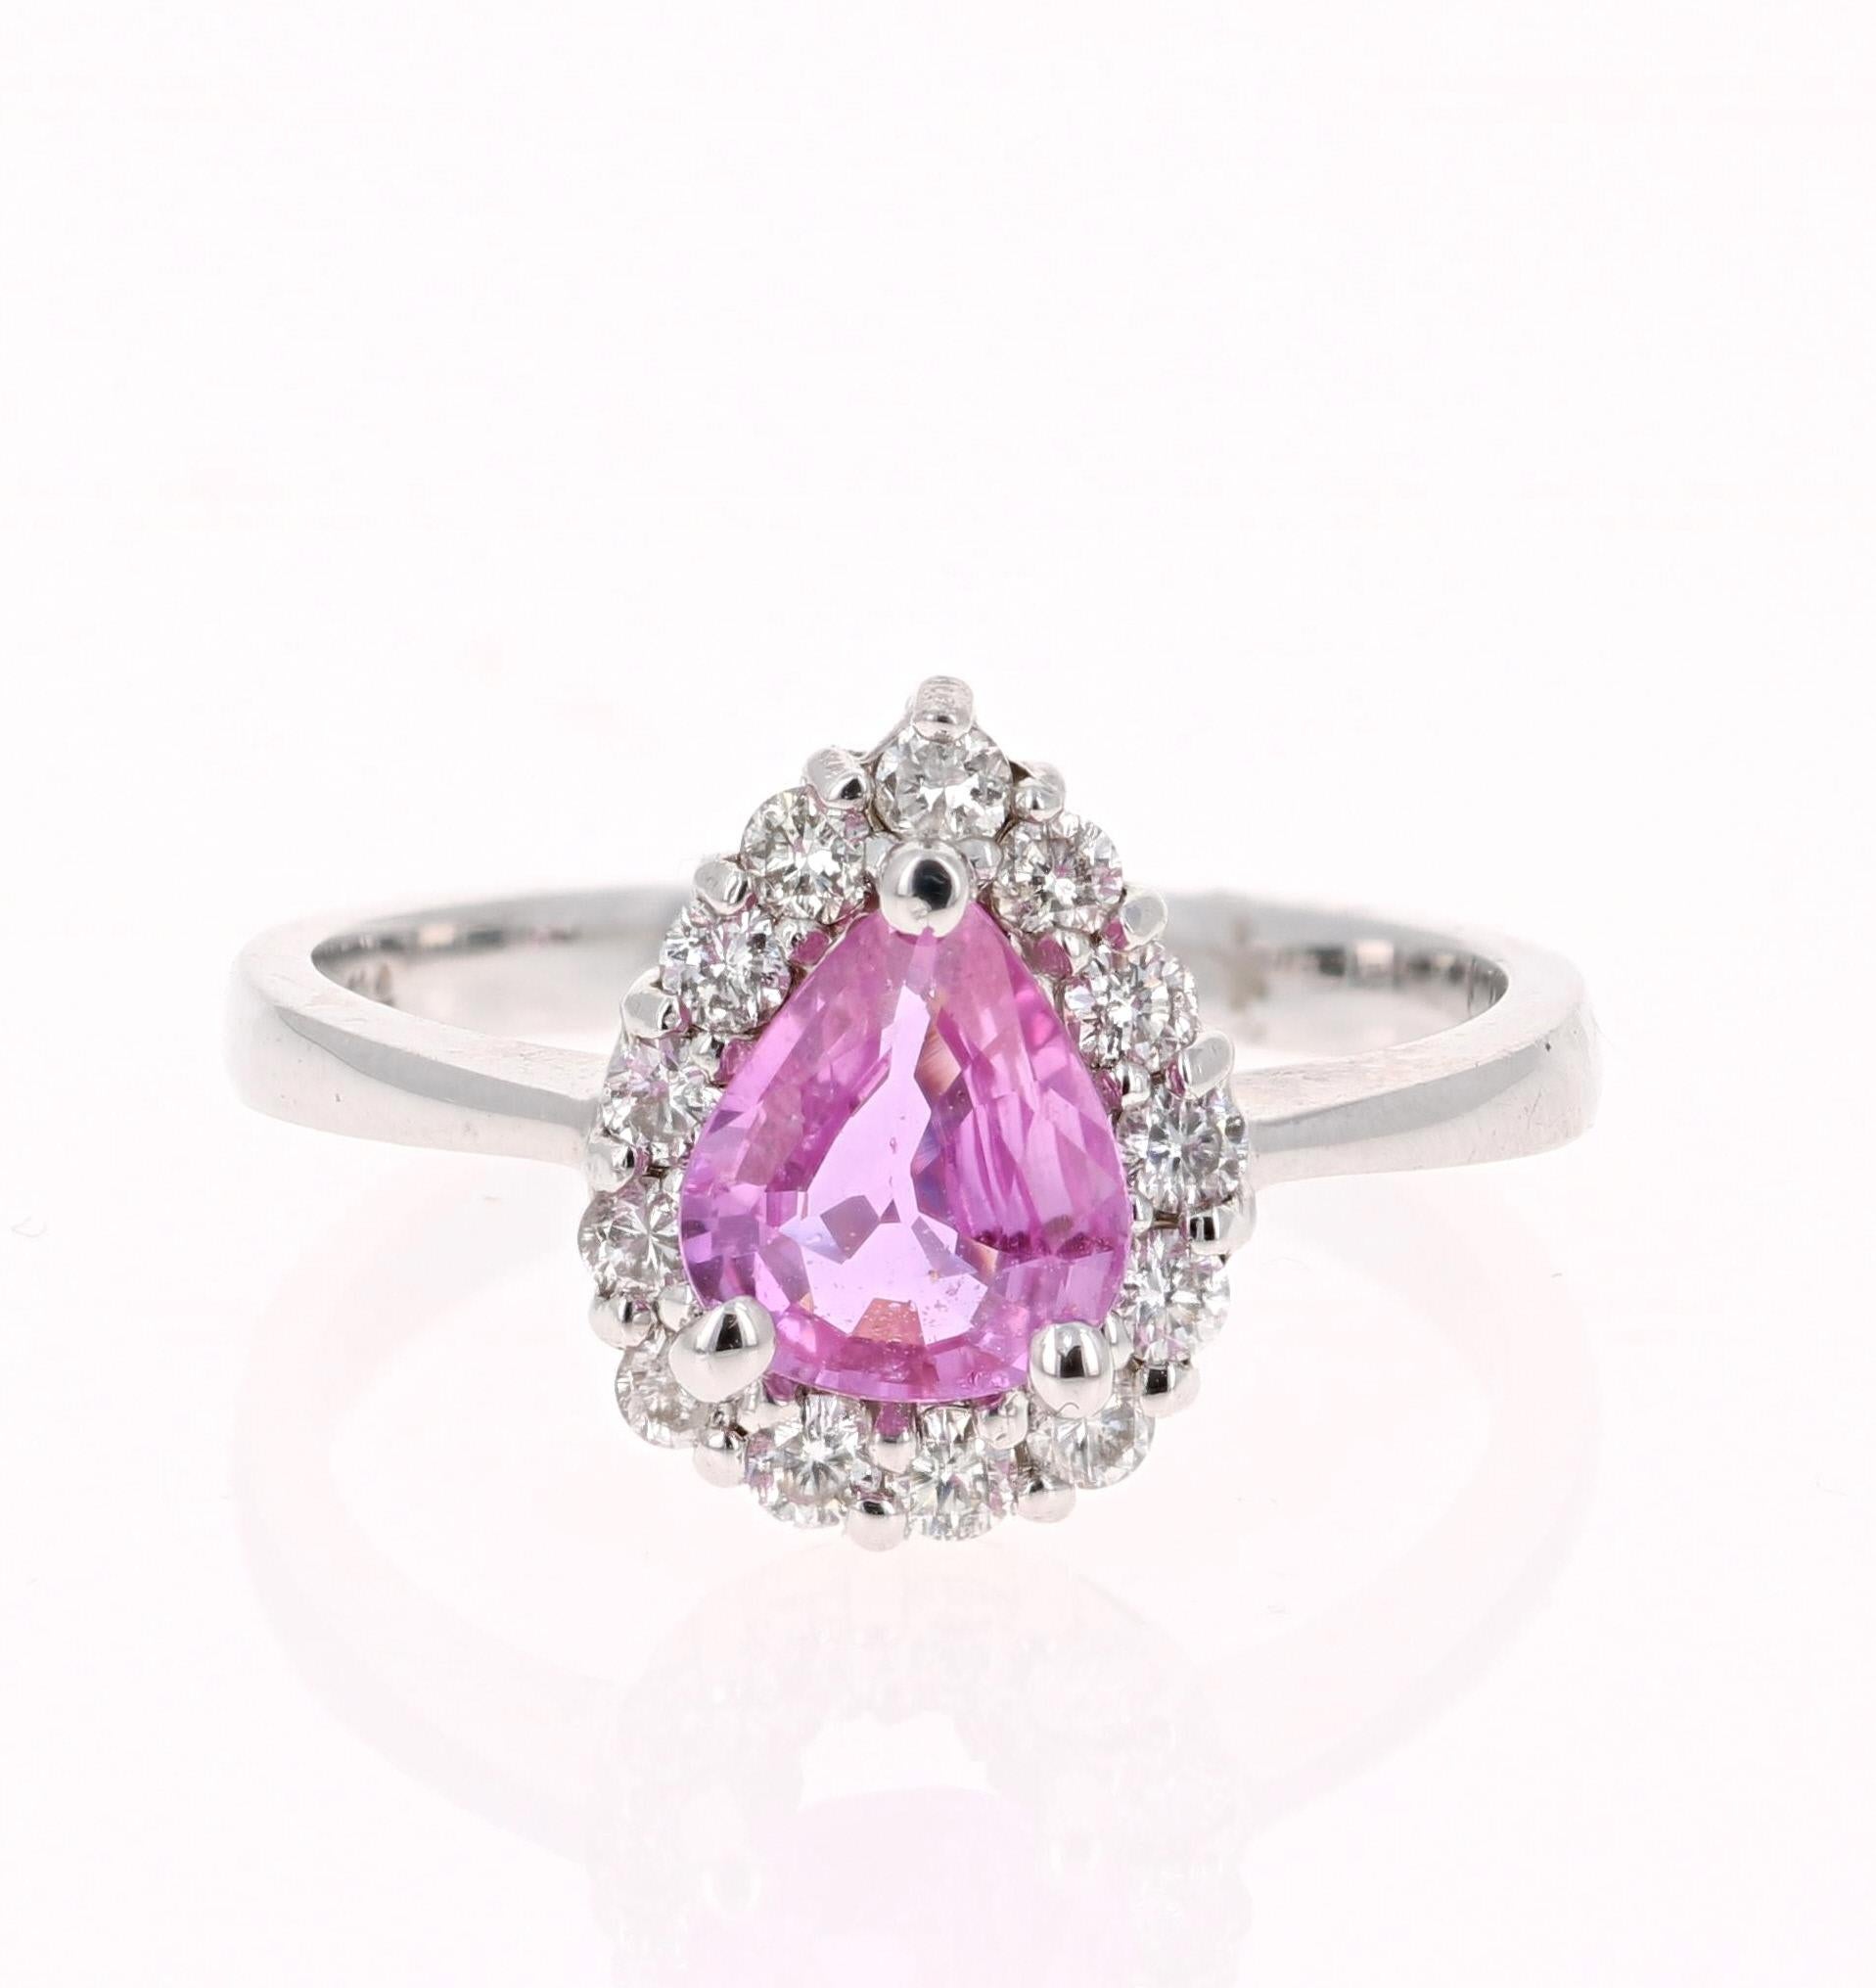 Gorgeous Pink Sapphire Diamond Ring with a classic setting! Can be a very unique Engagement Ring or Cocktail Ring! 

The center Pear Cut Pink Sapphire is 1.12 Carats surrounded by a halo of 13 Round Cut Diamonds weighing 0.39 Carats. The total carat